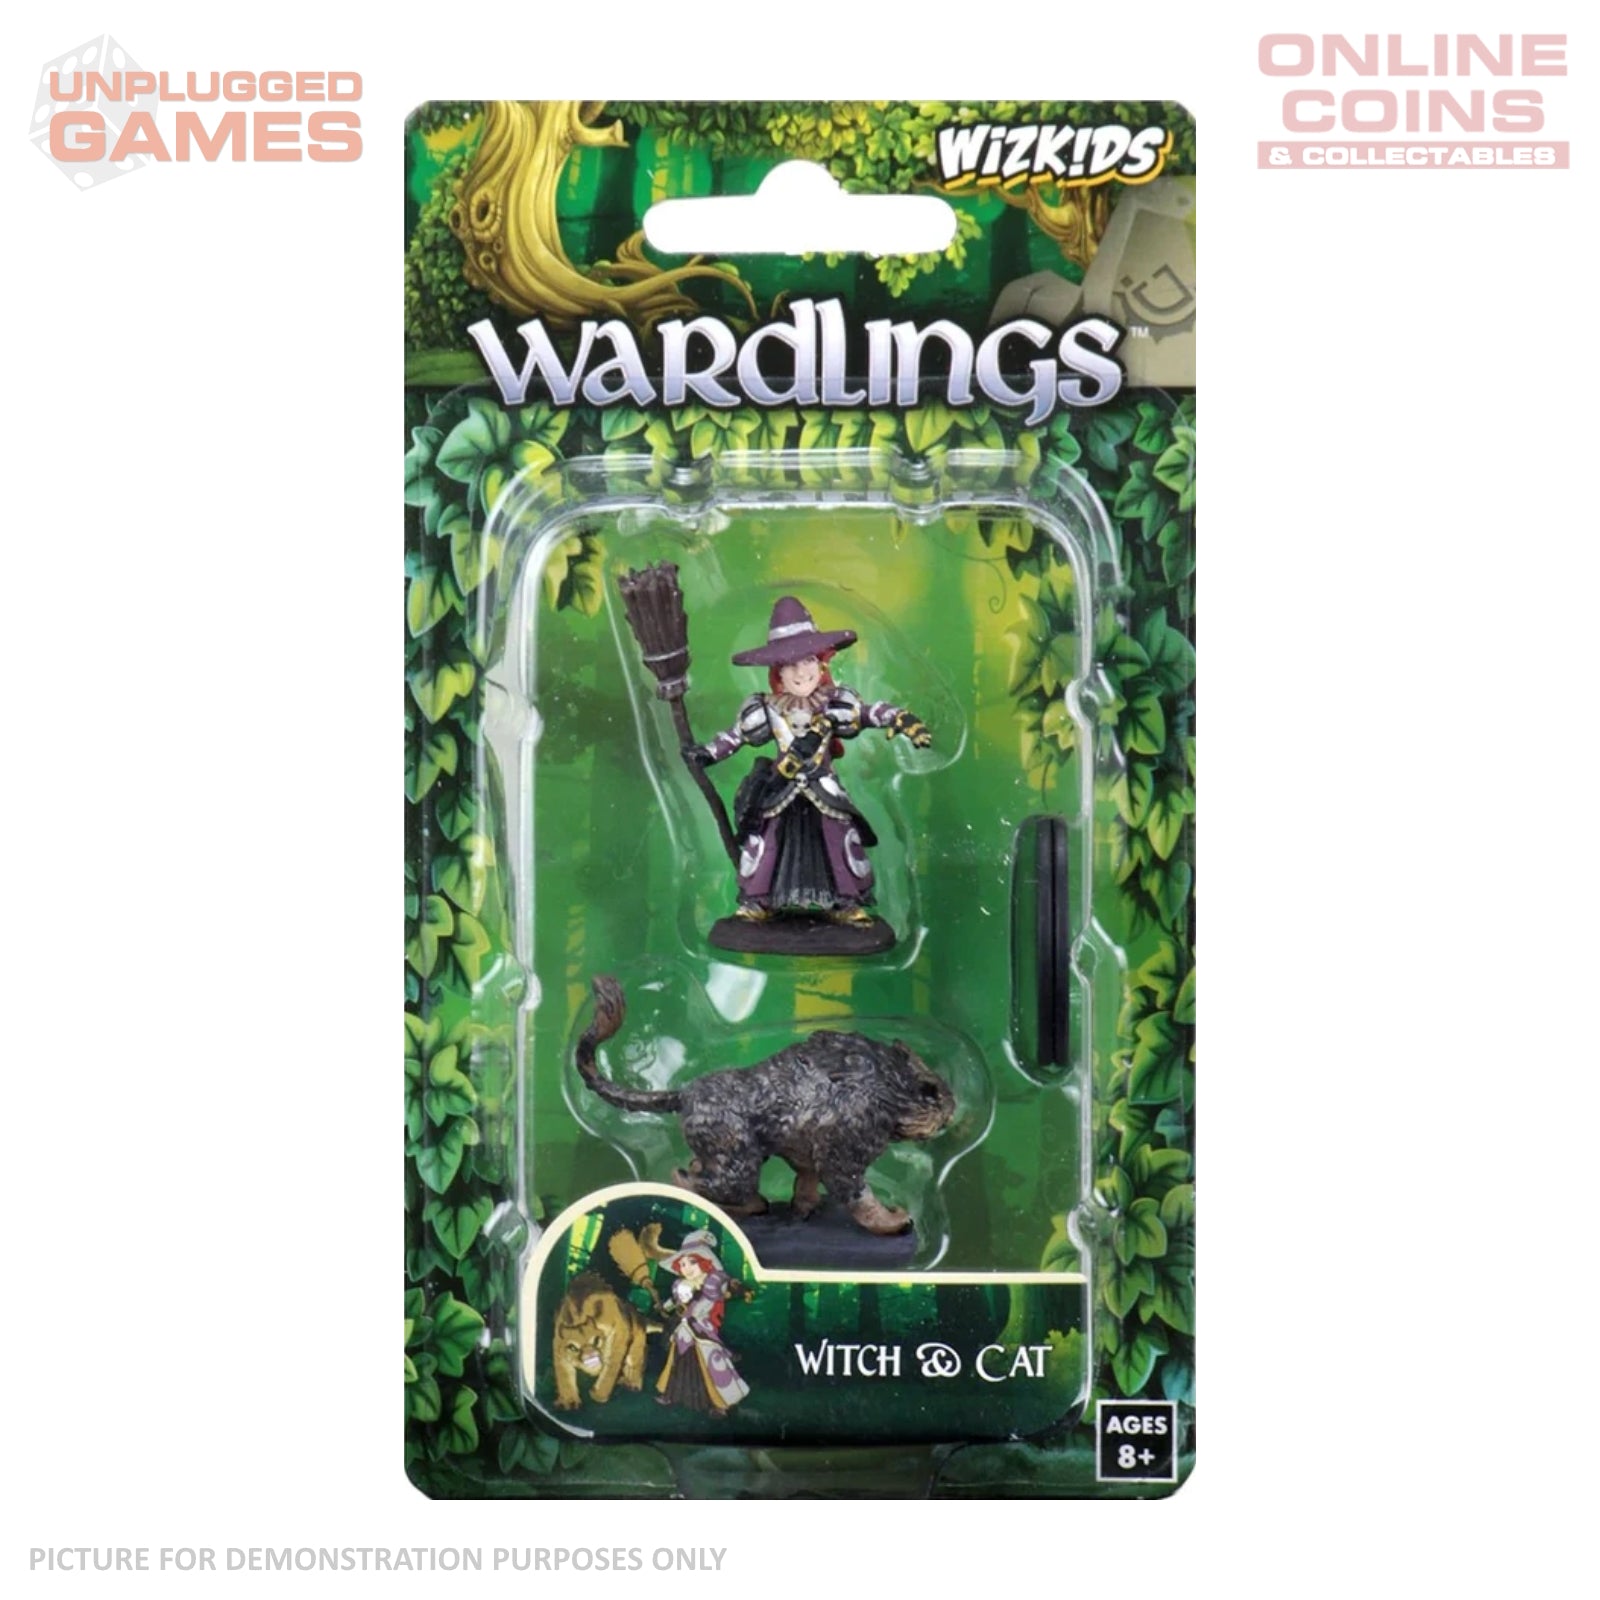 WizKids Wardlings RPG Figures - Girl Witch & Witchs Cat